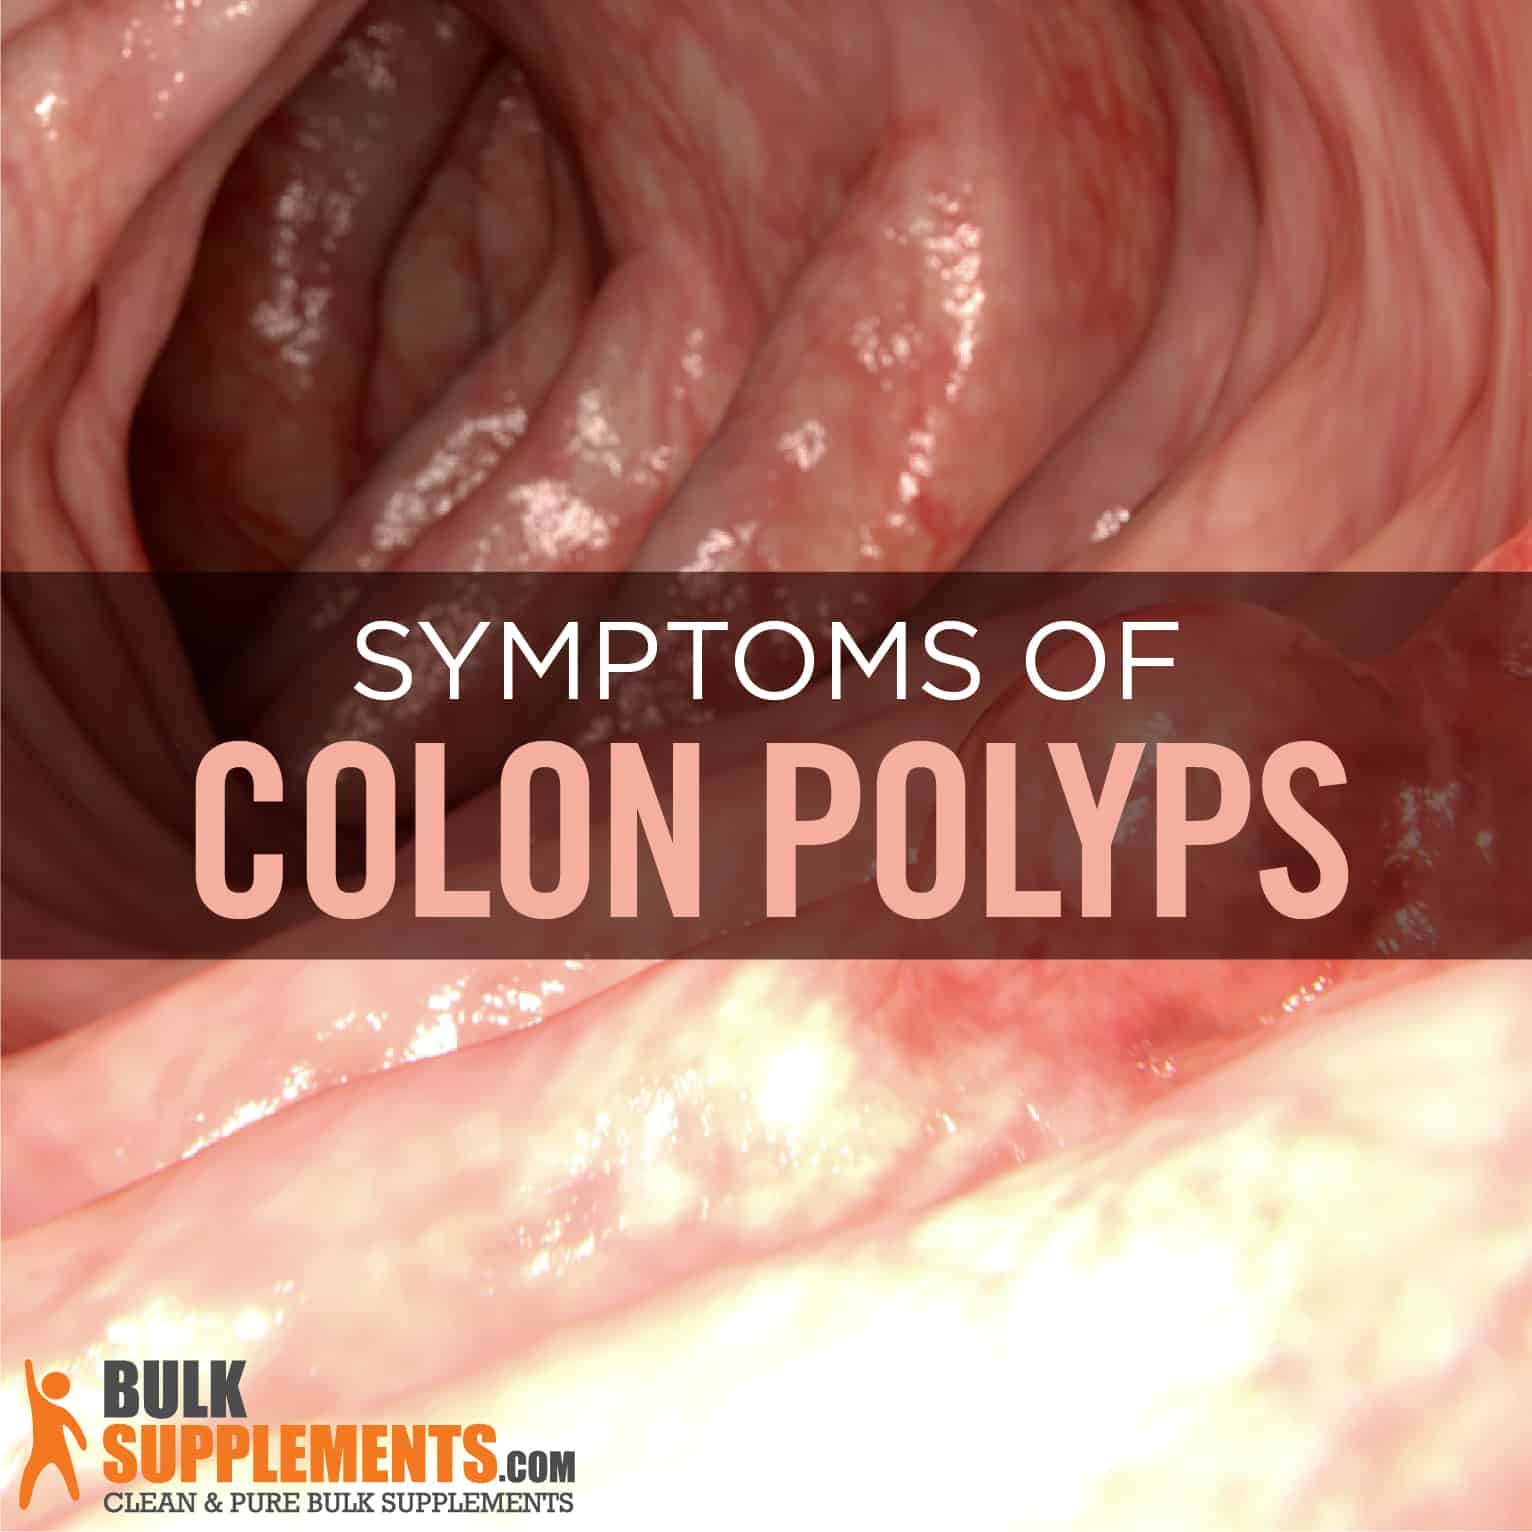 surgical removal of colon polyps